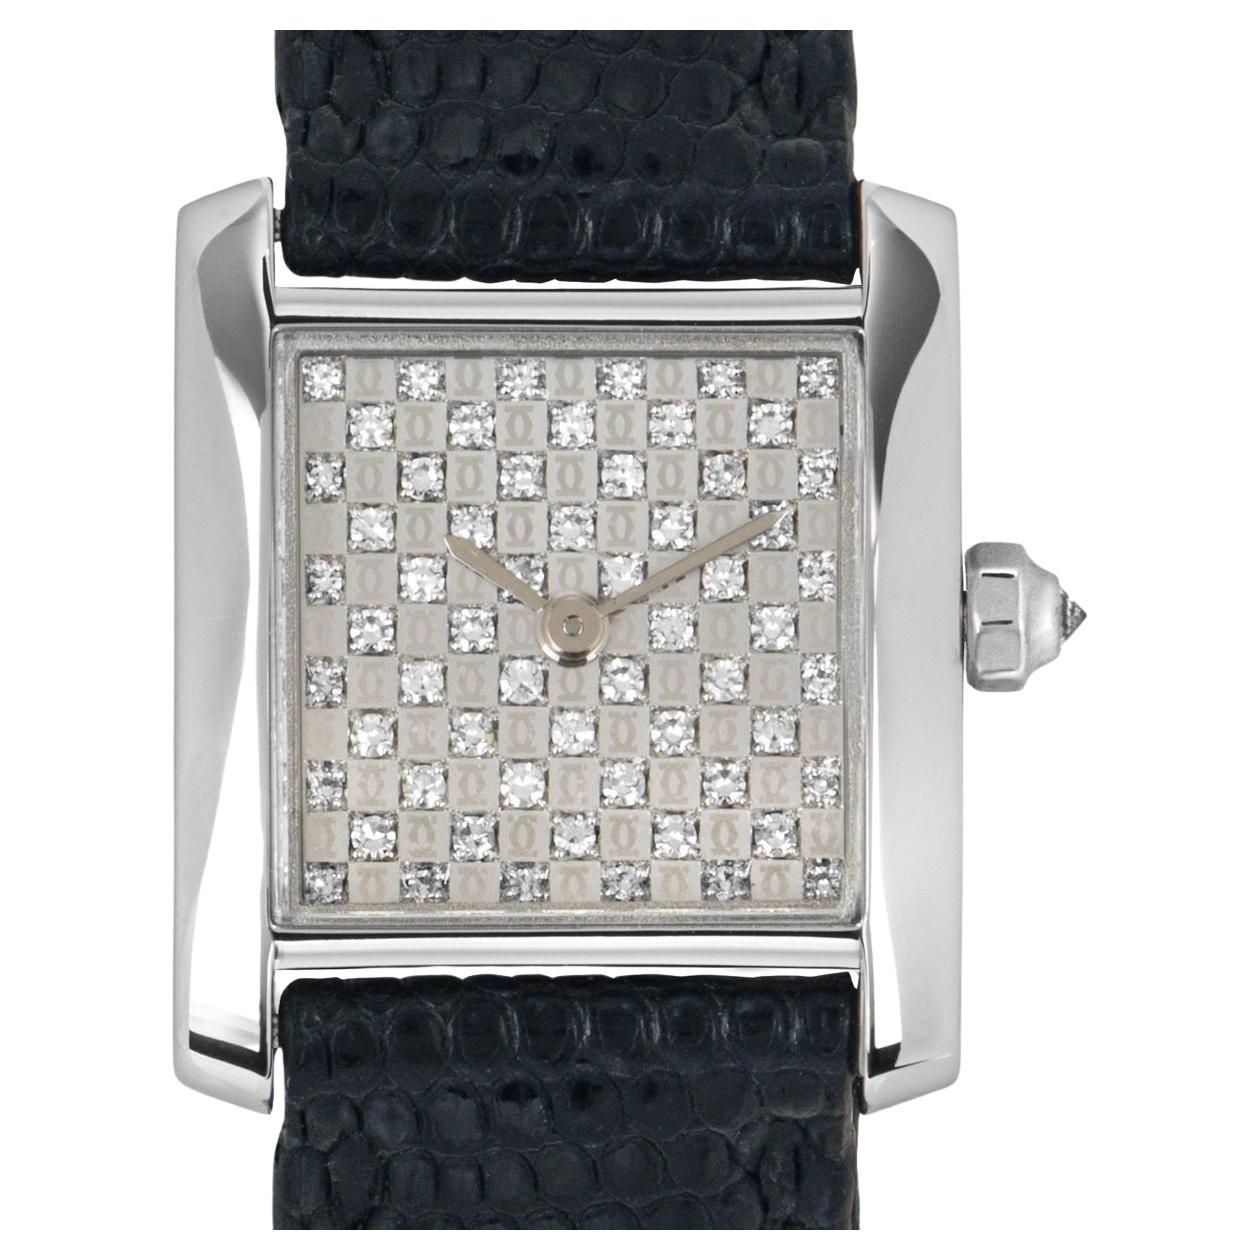 A ladies 20mm Cartier Tank Francaise crafted in white gold. Featuring a striking silver diamond dial with a fixed white gold bezel and crown set with a single inverted diamond. Fitted with a sapphire glass, a quartz movement and a Cartier black